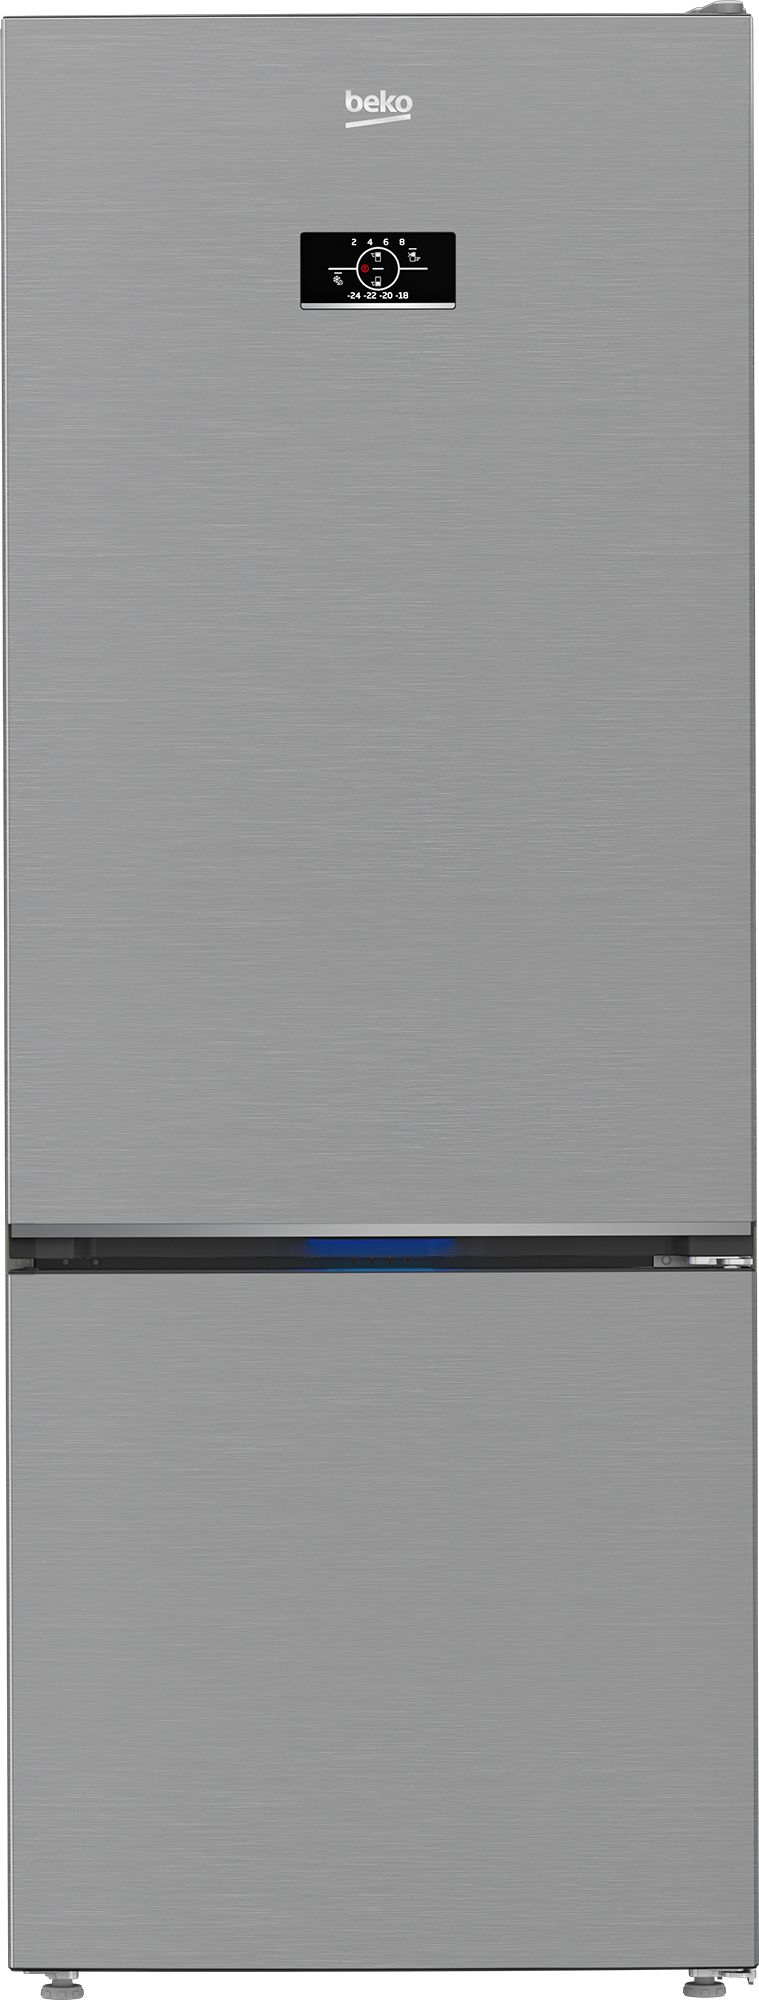 Beko CNG5785VPS 70/30 Frost Free Fridge Freezer - Stainless Steel Effect - D Rated, Stainless Steel